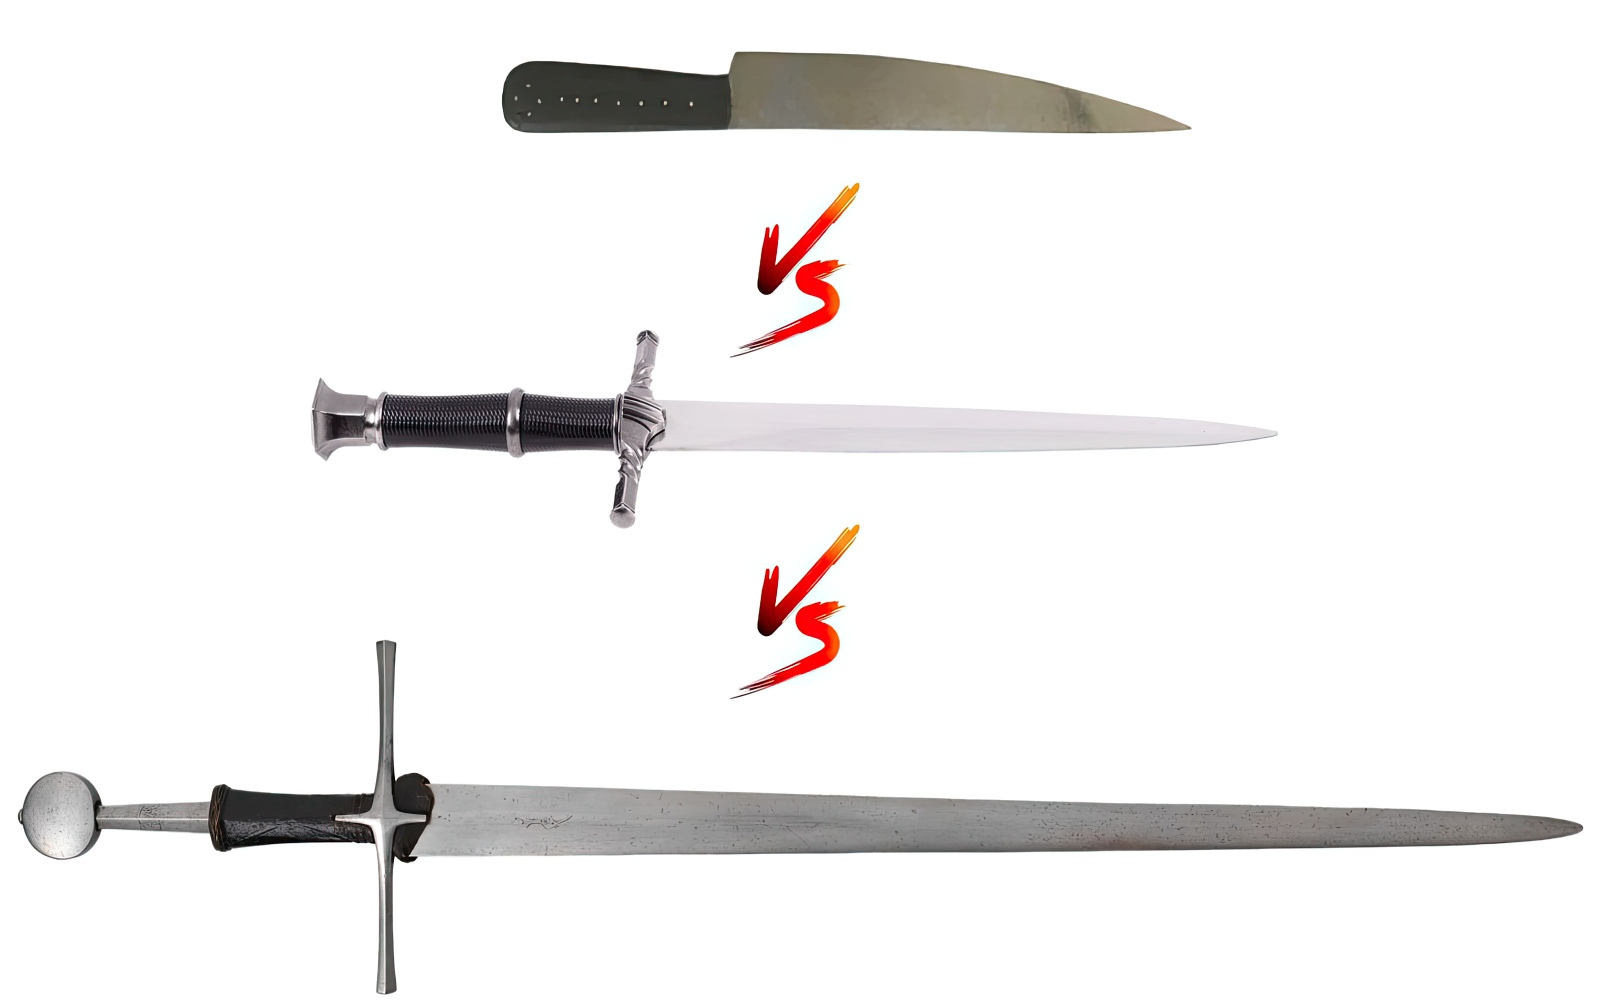 Knife vs Dagger vs Sword: Key Differences and Uses